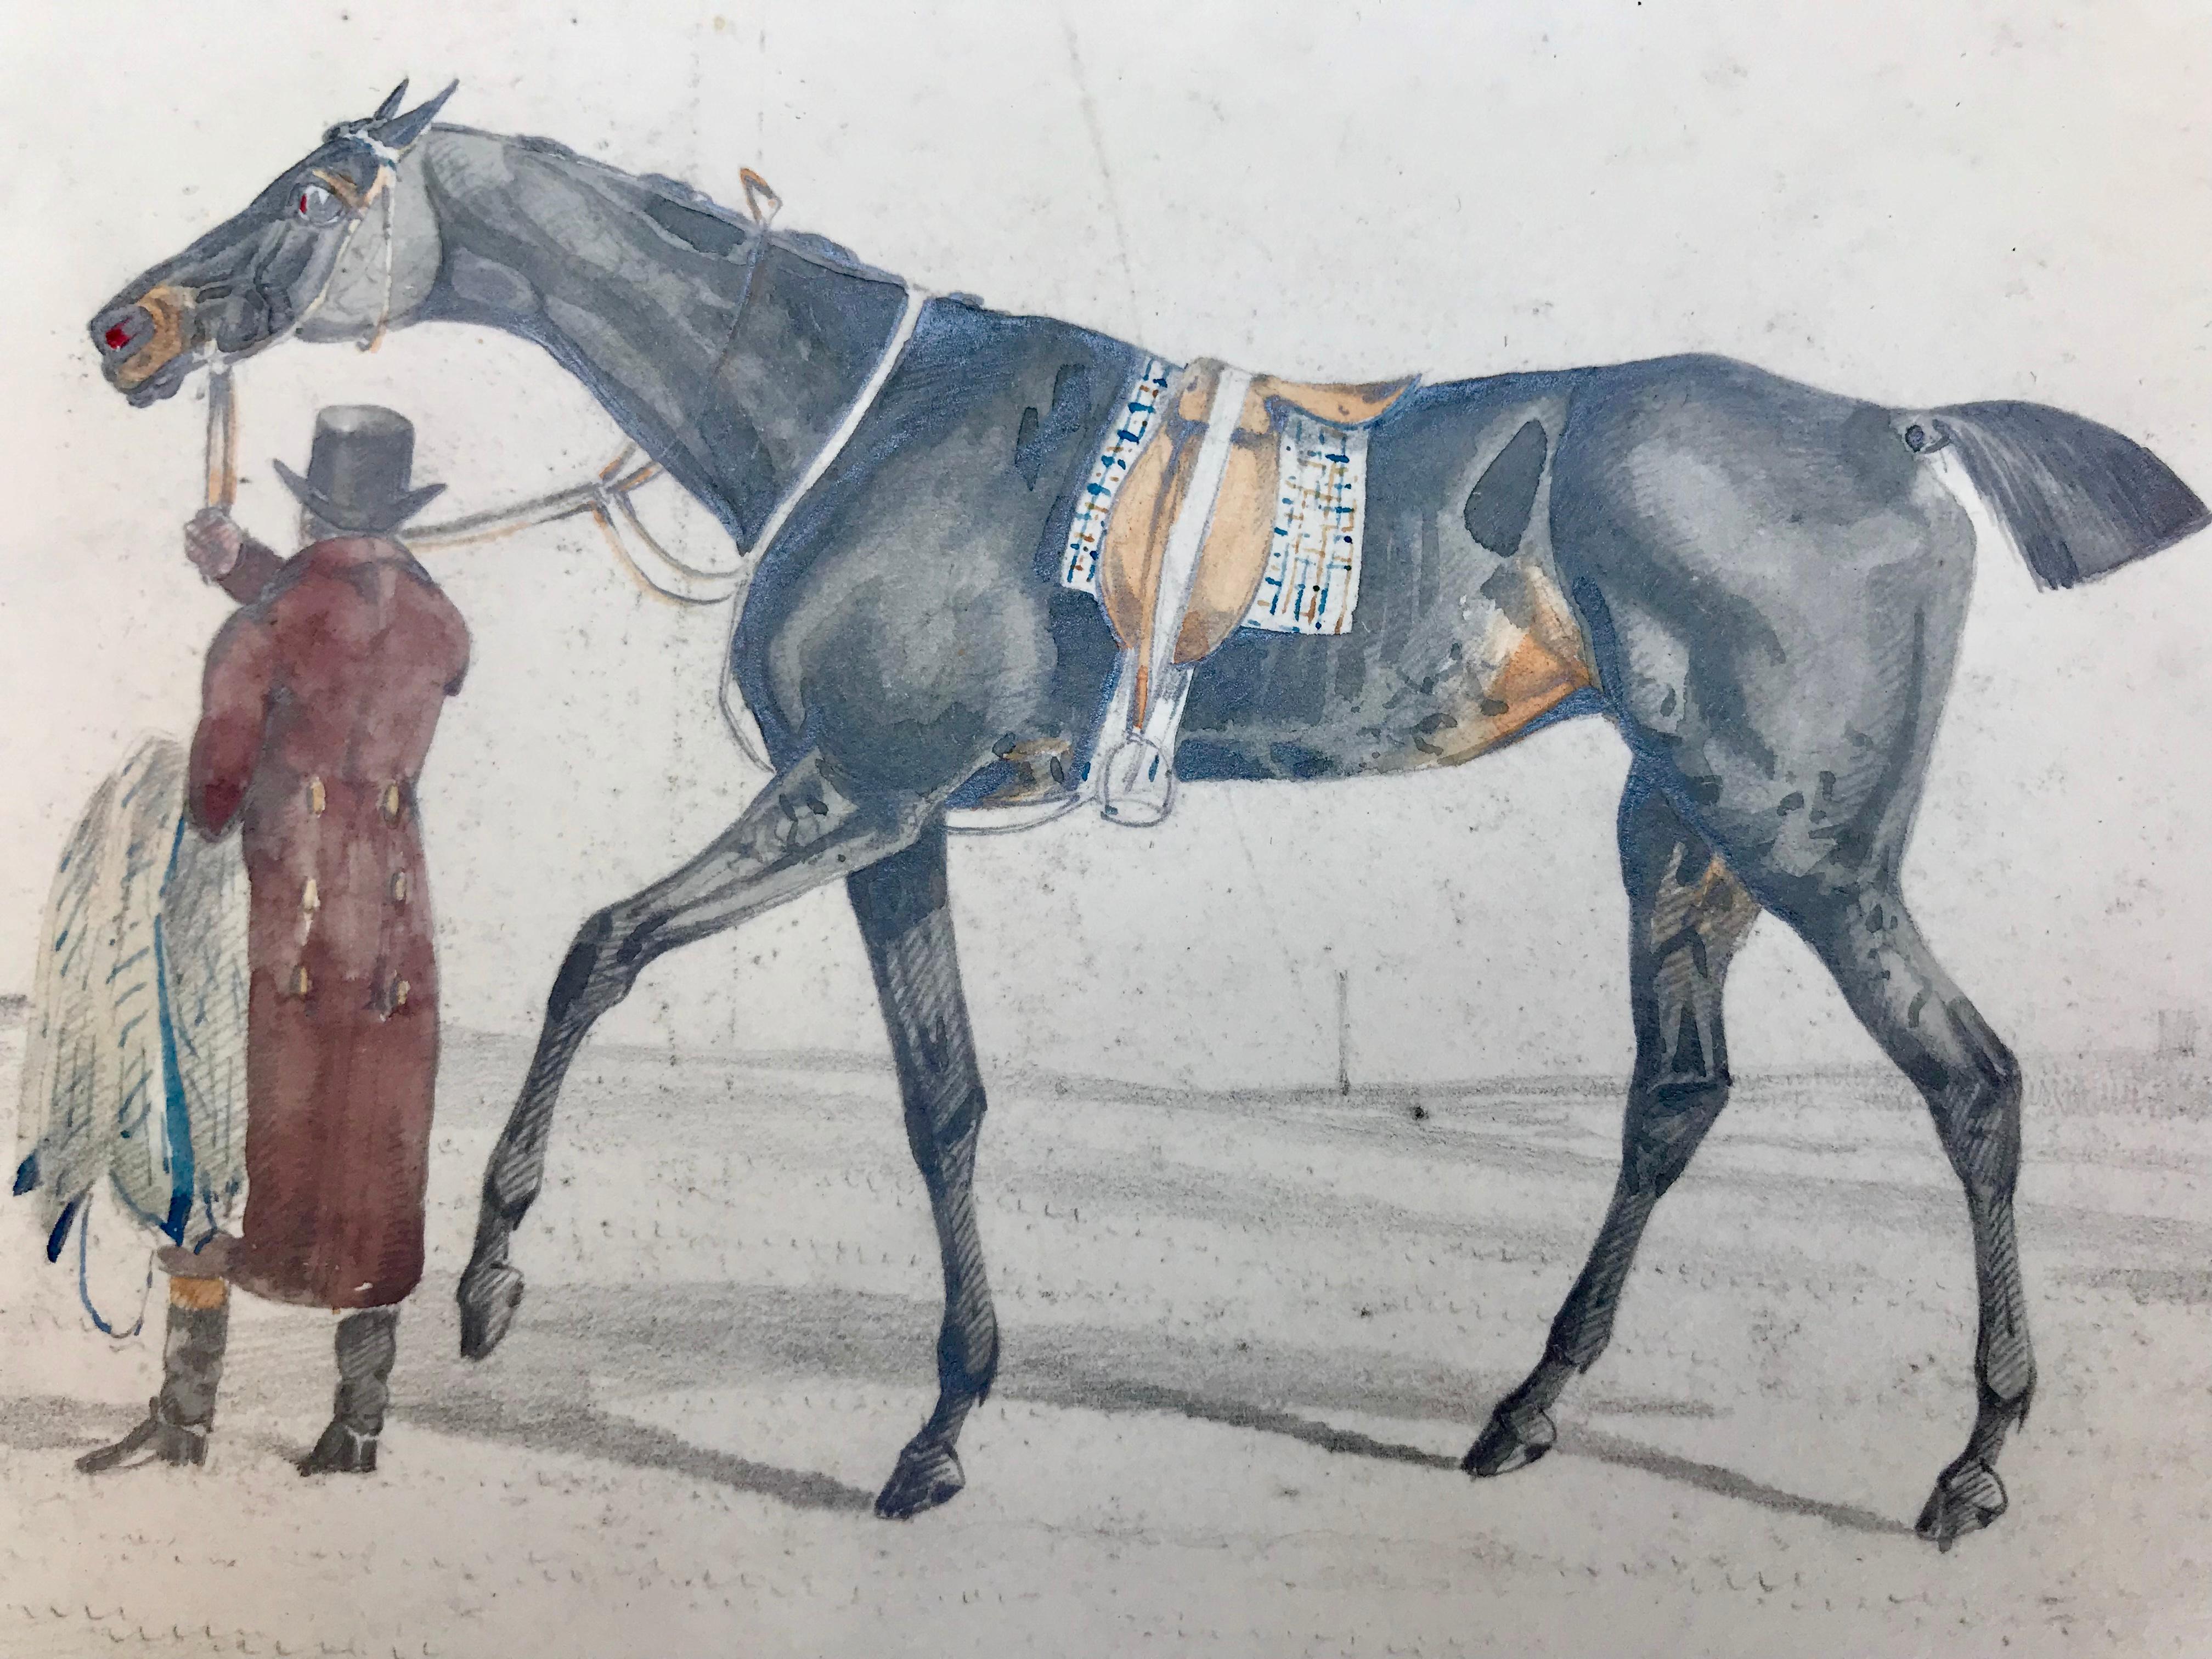 Graphite and watercolor attributed to the well known British artist, Henry Thomas Alken.  Circa 1825. Unsigned.   Condition:  Good.  Provenance:  Christie’s London, 1993. Matted but presently unframed.

Alken was born on 12 October 1785 in Soho,